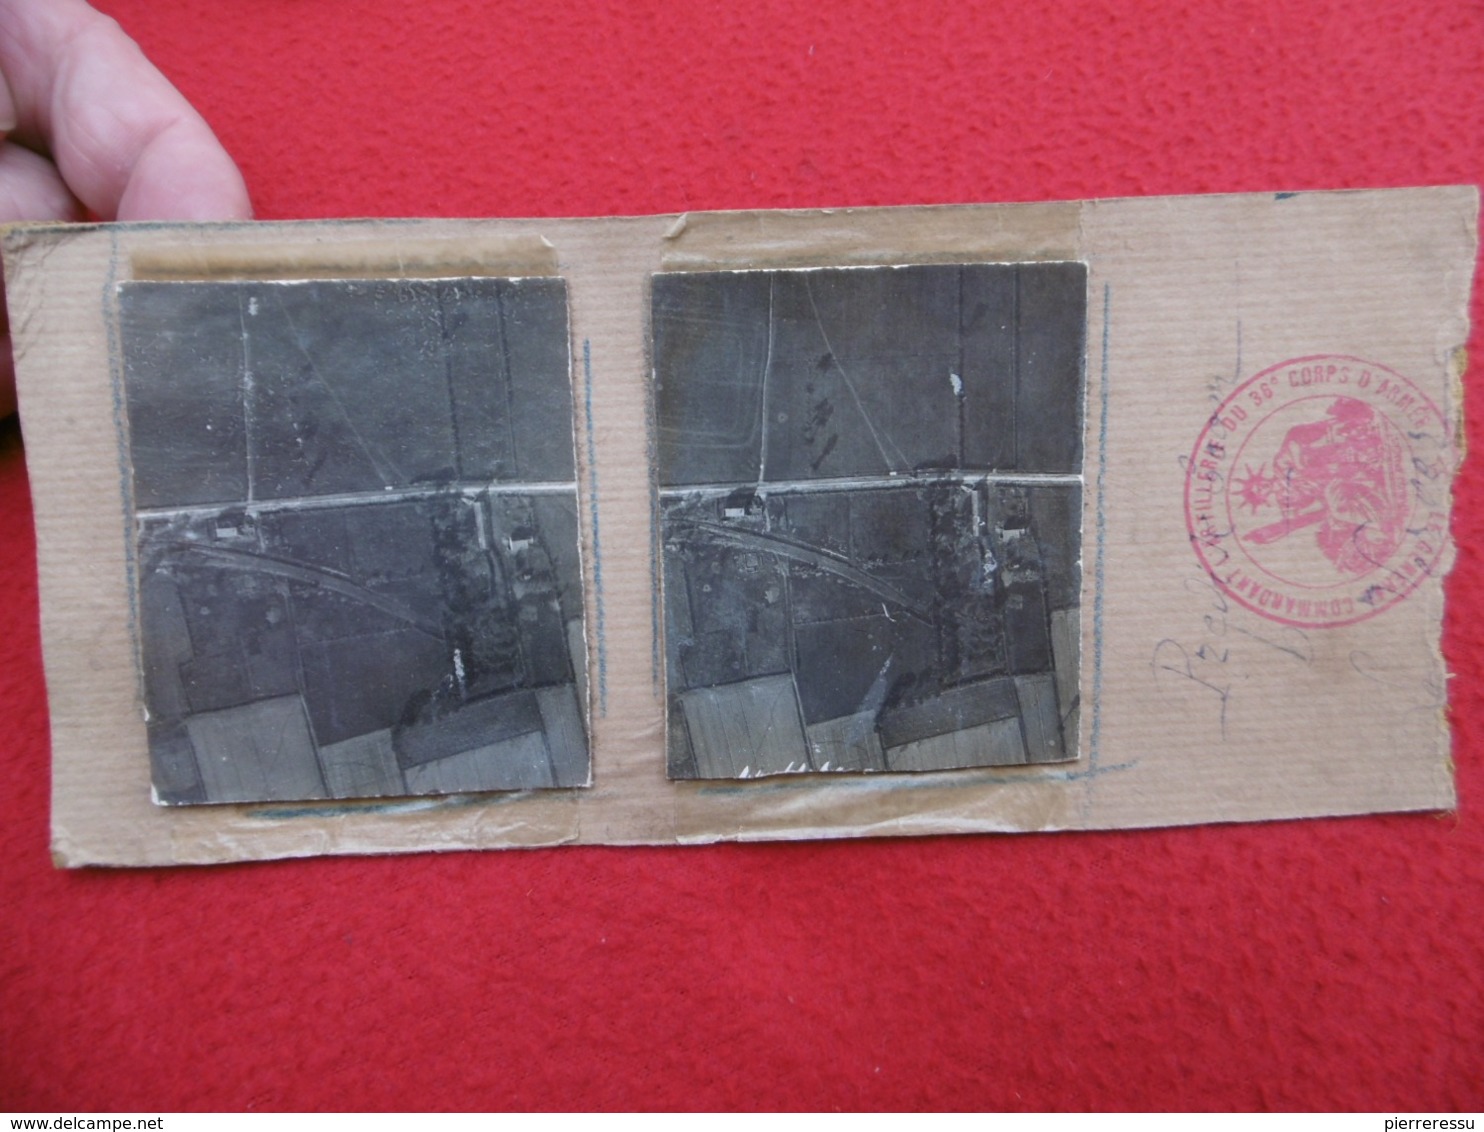 VUE AERIENNE CACHET 36 CORPS D ARMEE PHOTO STEREO - Stereoscopic